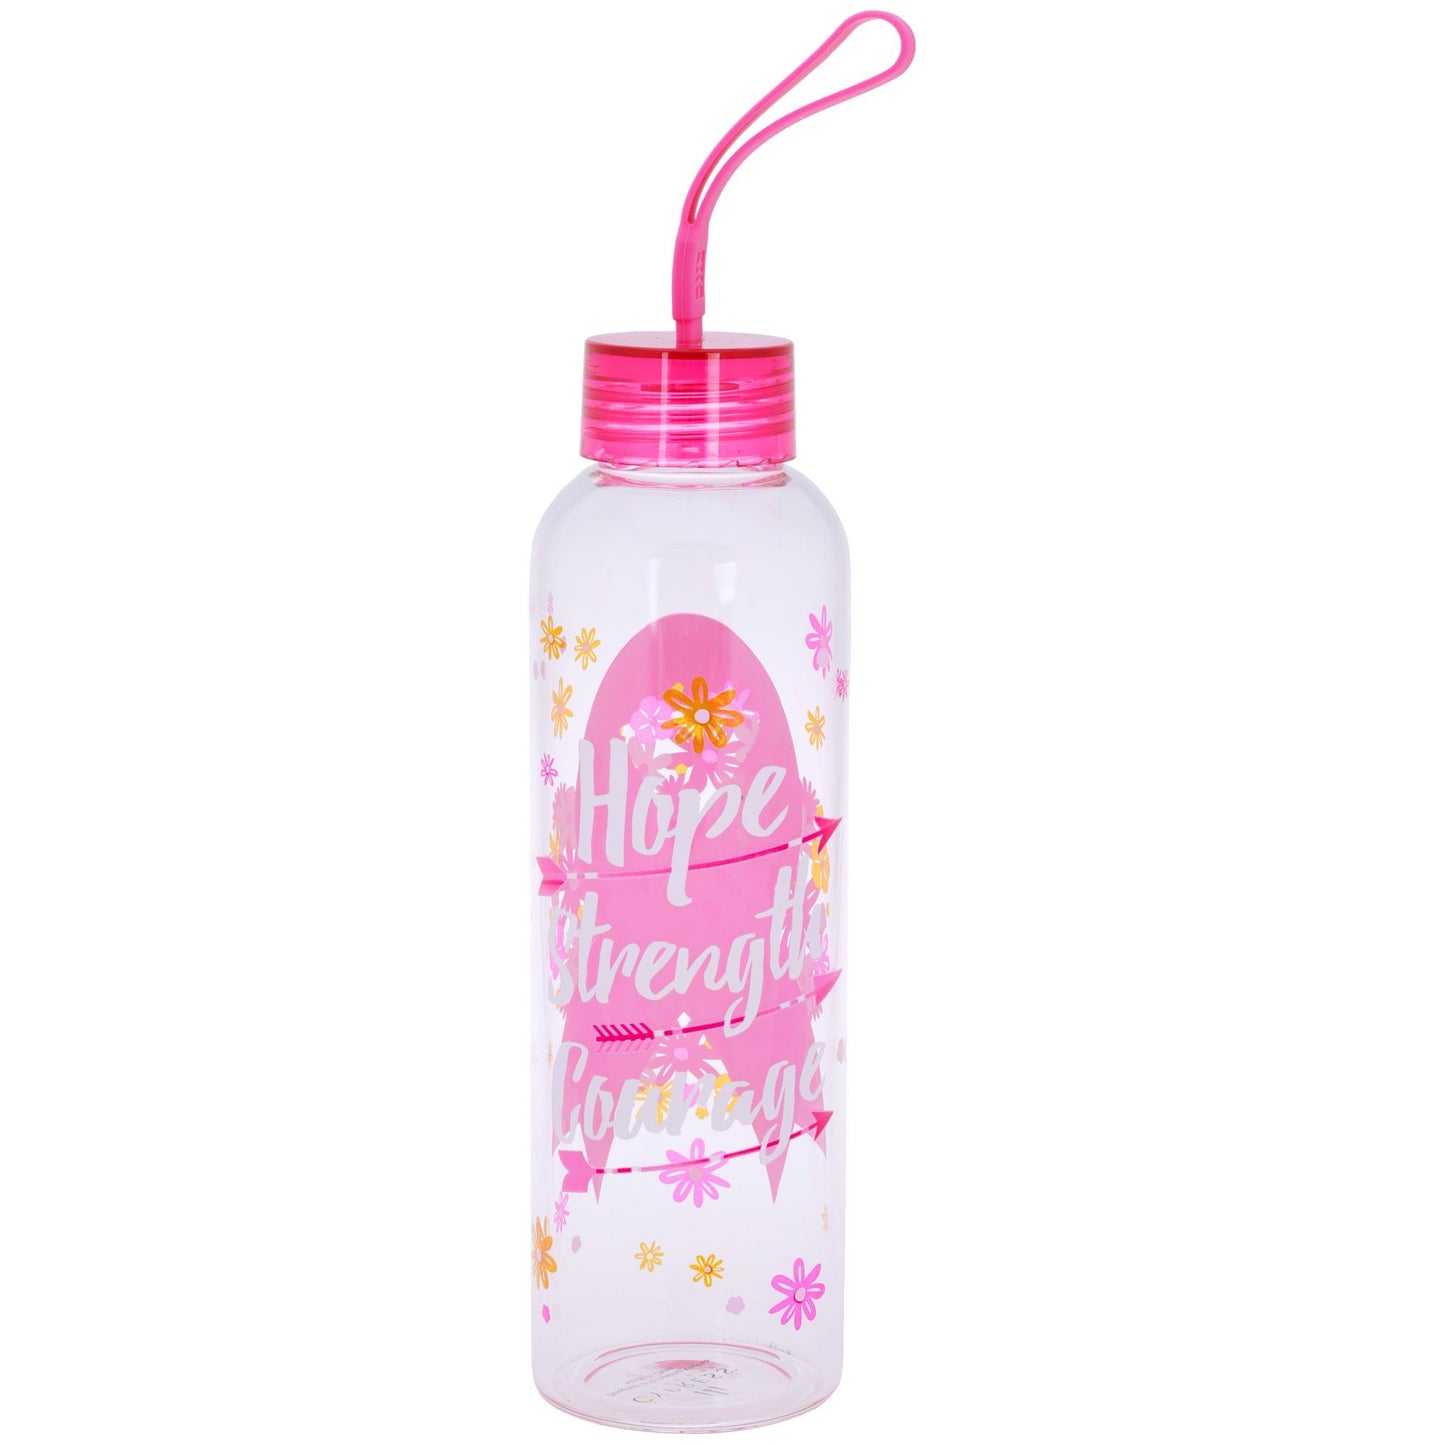 Hope Strength Courage Glass Water Bottle